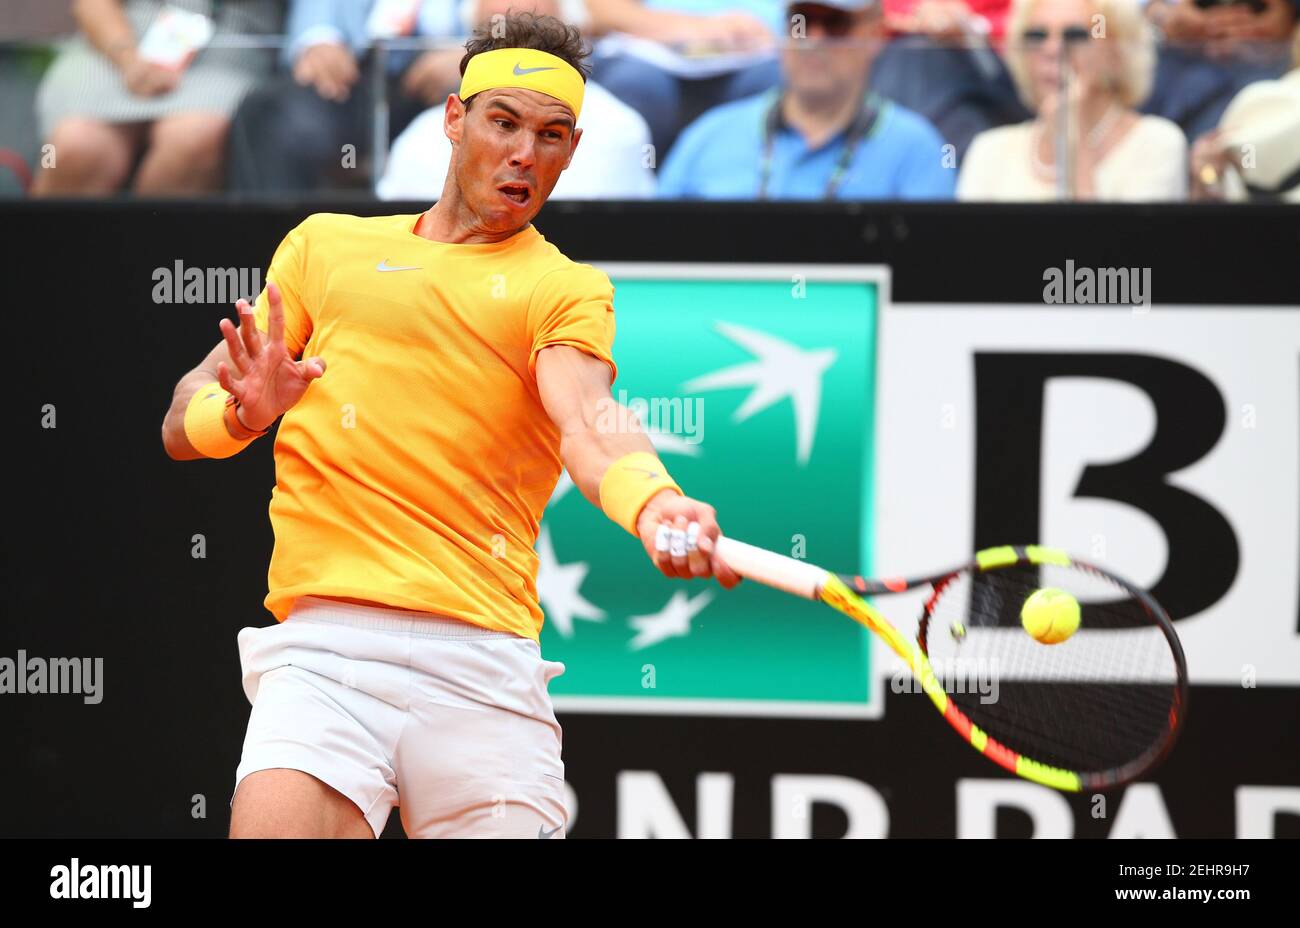 Tennis - ATP World Tour Masters 1000 - Italian Open - Foro Italico, Rome, Italy - May 18, 2018   Spain's Rafael Nadal in action during his quarter final match against Italy's Fabio Fognini   REUTERS/Alessandro Bianchi Stock Photo